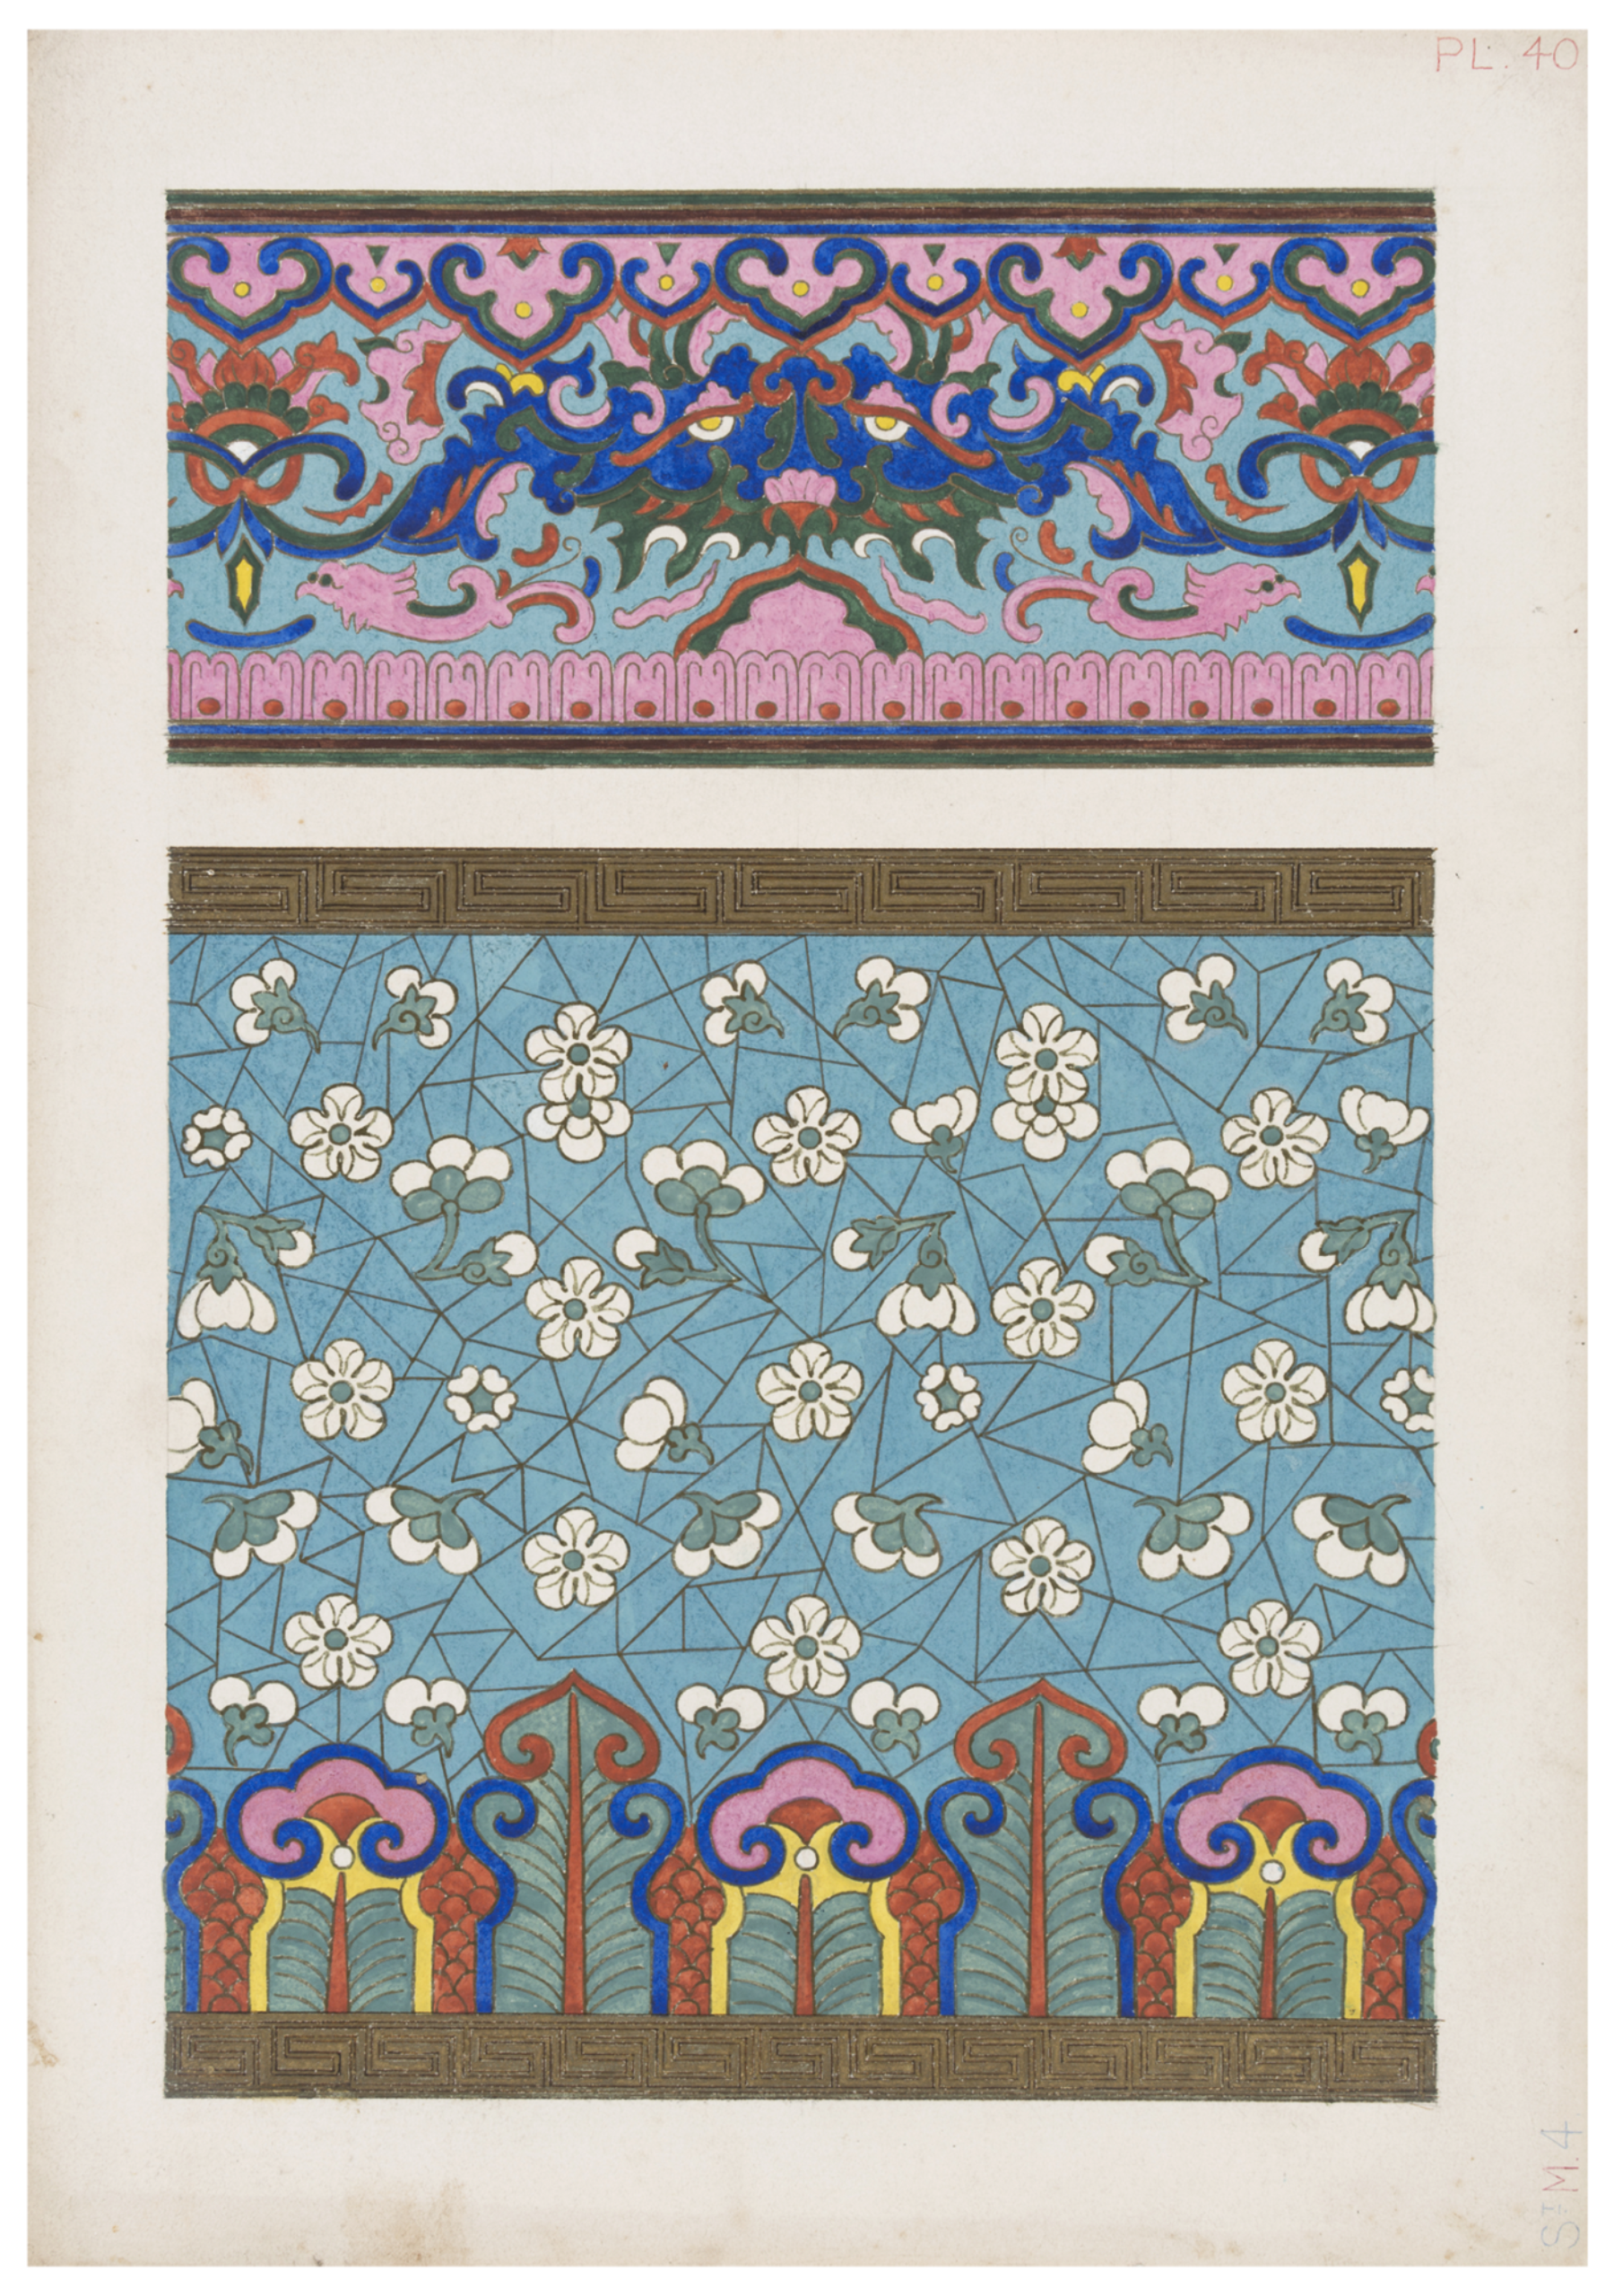 Owen Jones, Designs (1 of 51) for publication in Examples of Chinese Ornament (London, 1867) (Plates 10, 40, 56), 1866–67. Paper, gouache, gold paint, drawing, 13 1/2 x 9 1/2 inches (34.3 x 24.1 cm) each. Victoria and Albert Museum, London. Purchased with the support of the National Heritage Memorial Fund, Art Fund, V&A Members and The Belvedere Trust, ⒸVictoria and Albert Museum, London.